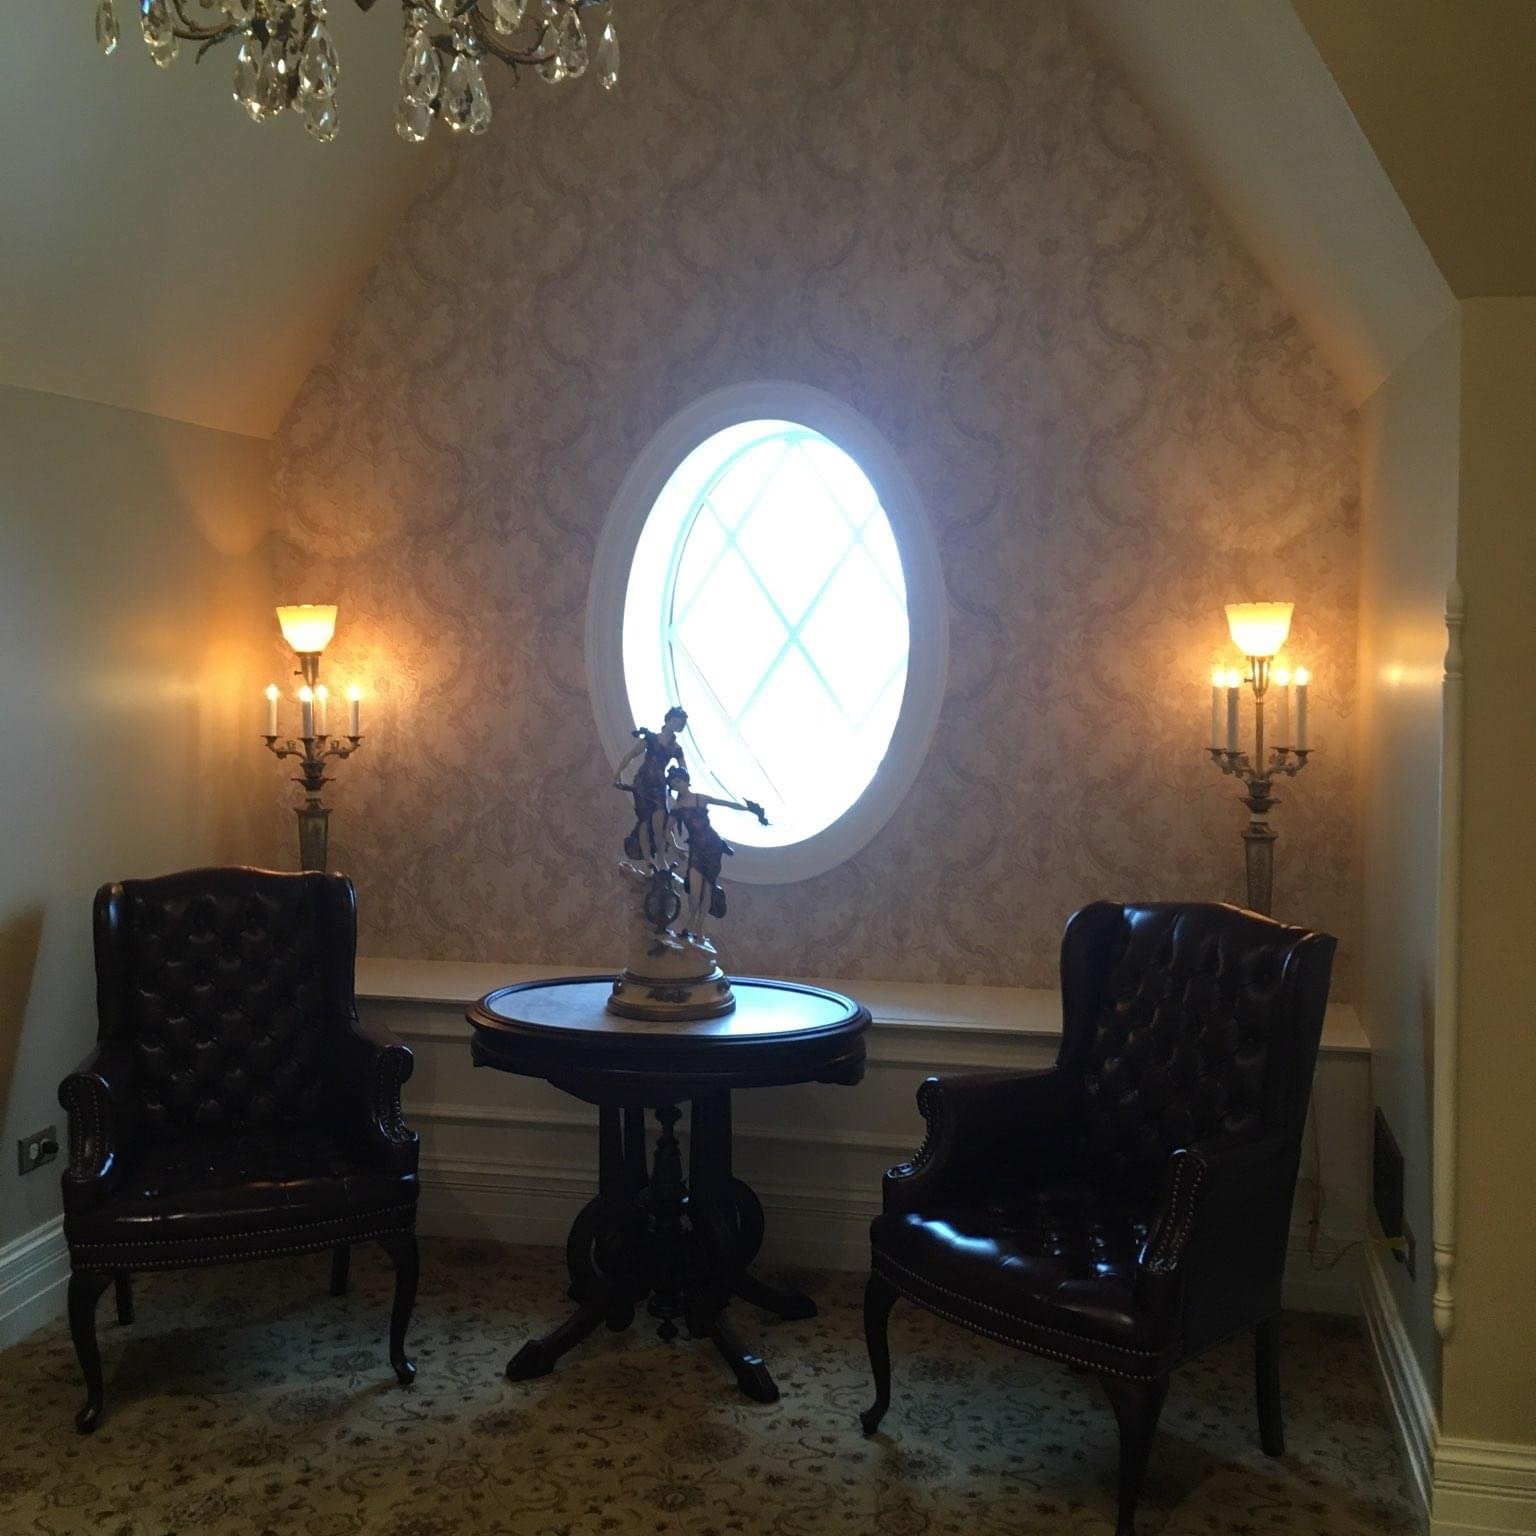 The best Wednesdays are our clients in #wallpaperinthewildwednesday #wallpaperwednesday #wallpaper 
Multiple stunning walls at the restored @haleymansion